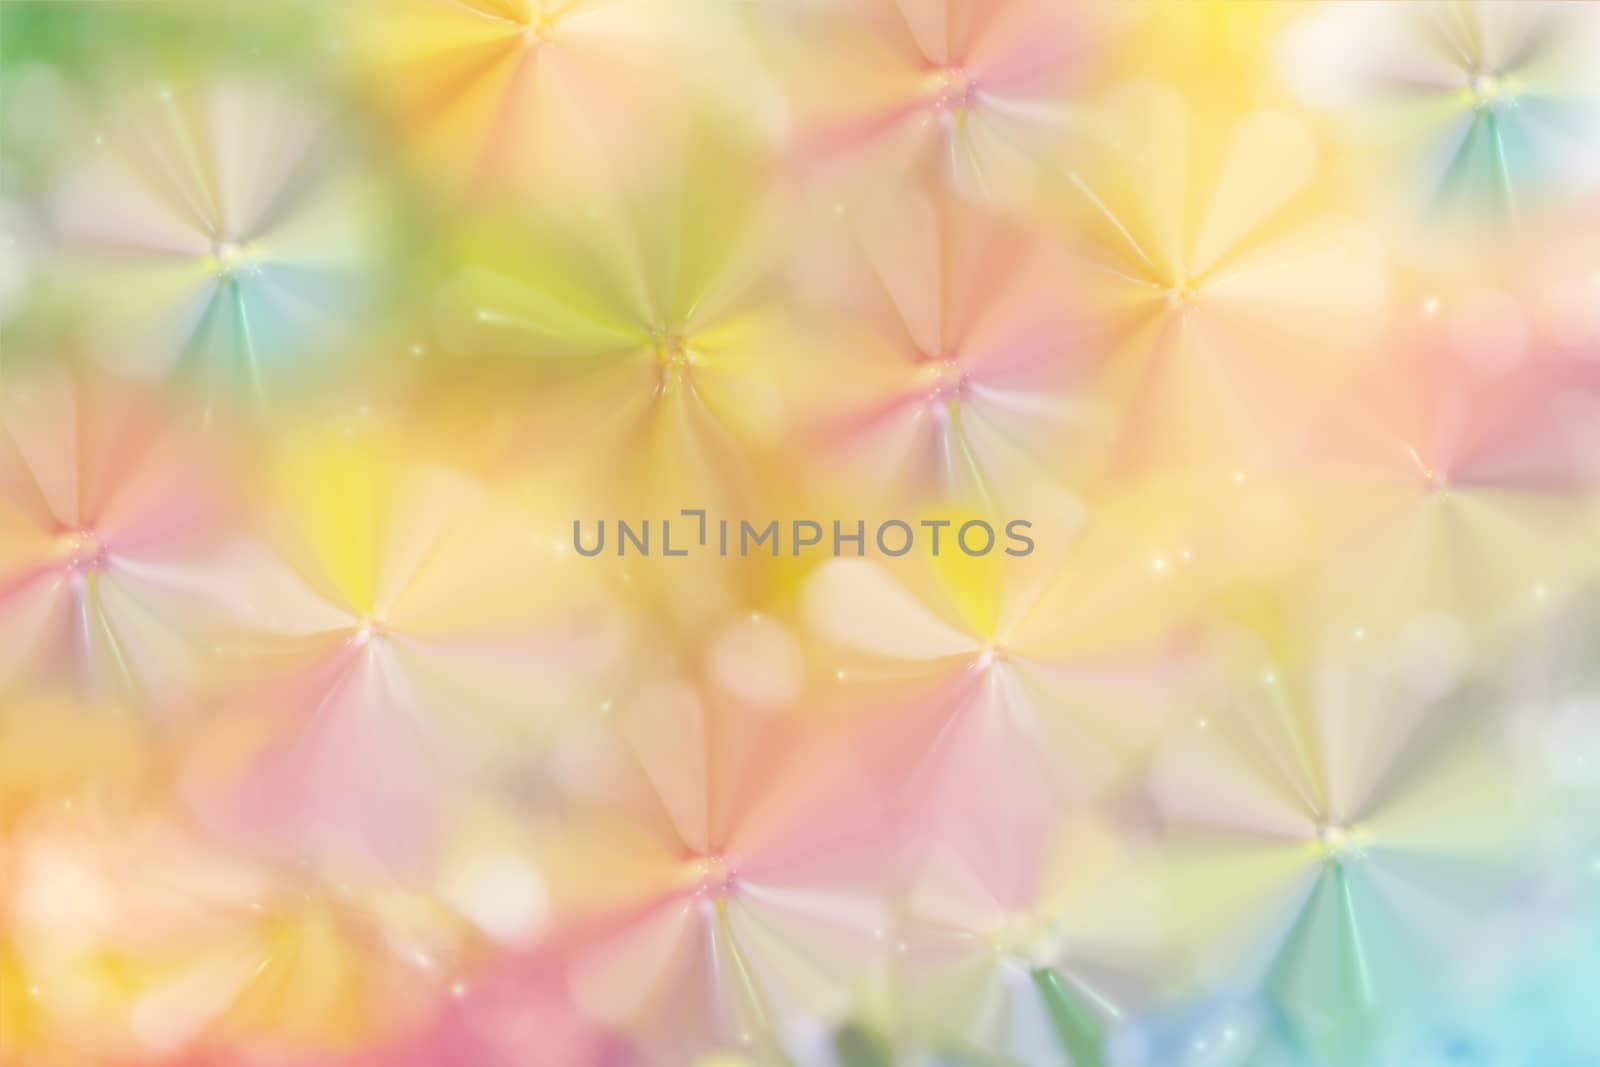 Dreamy pastel colourful abstract flower and butterfly sweet and romantic love or blossom background